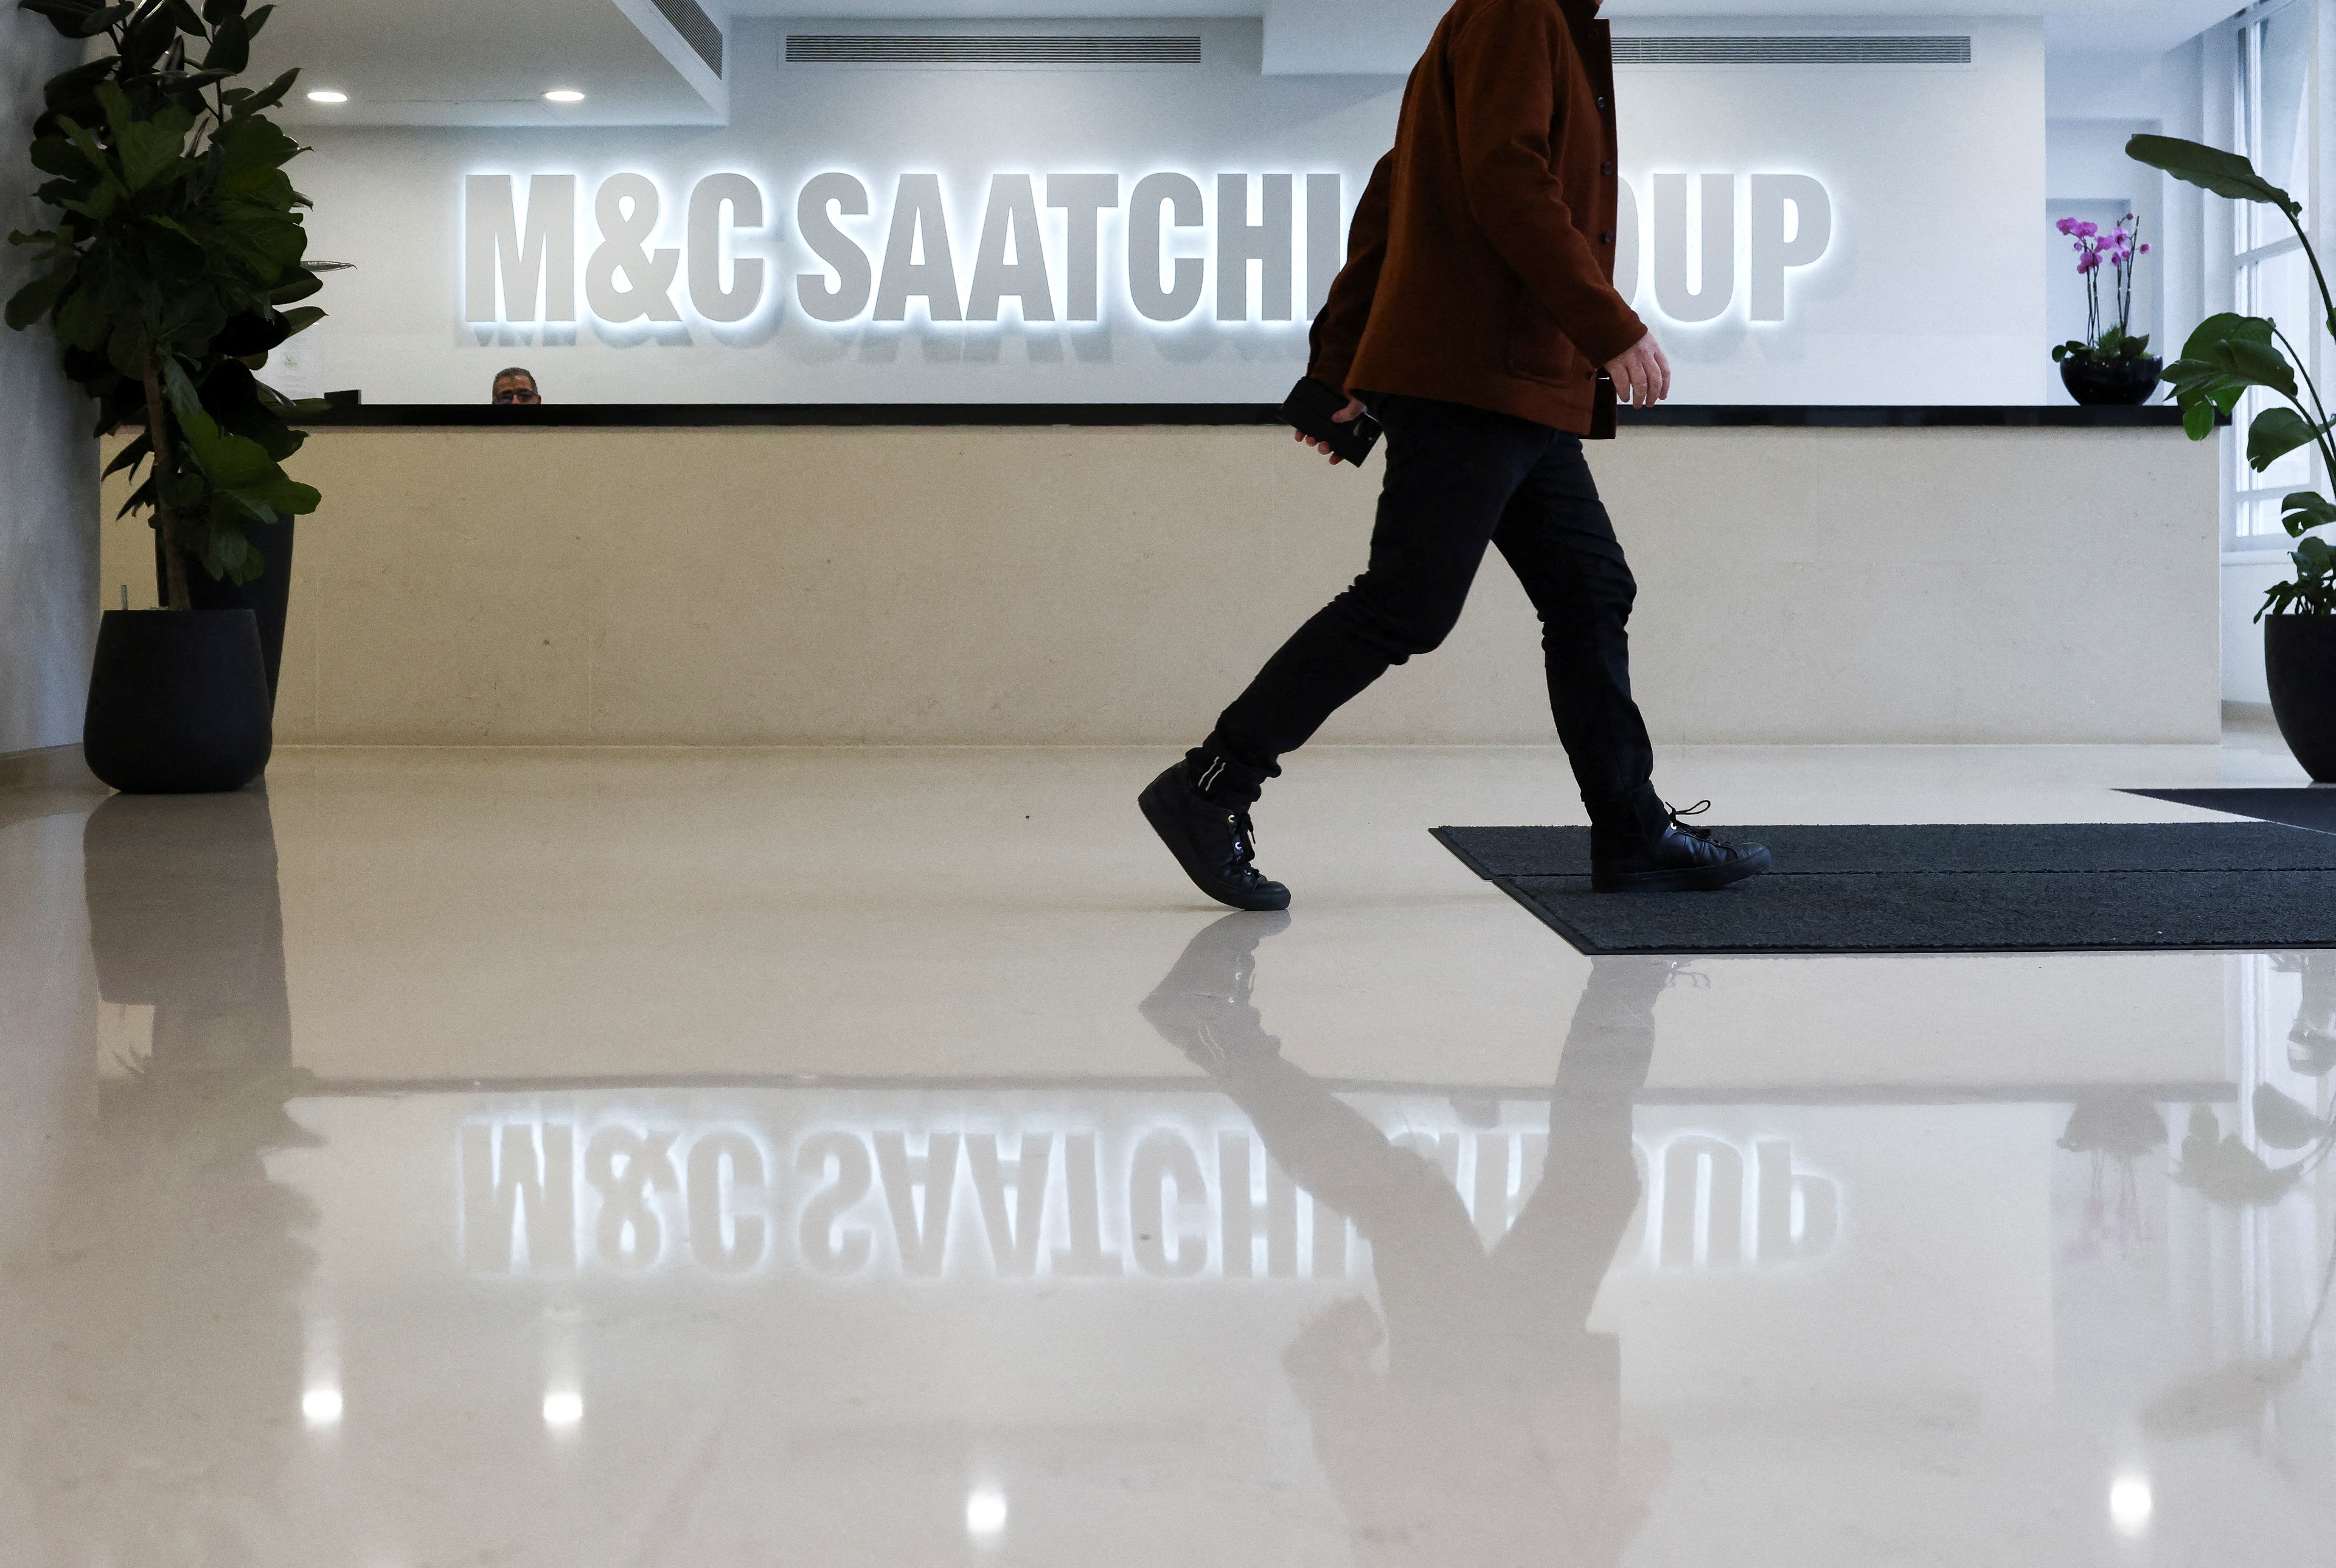 A person walks through the reception of the M&C Saatchi office in central London, Britain, January 6, 2022. REUTERS/Henry Nicholls